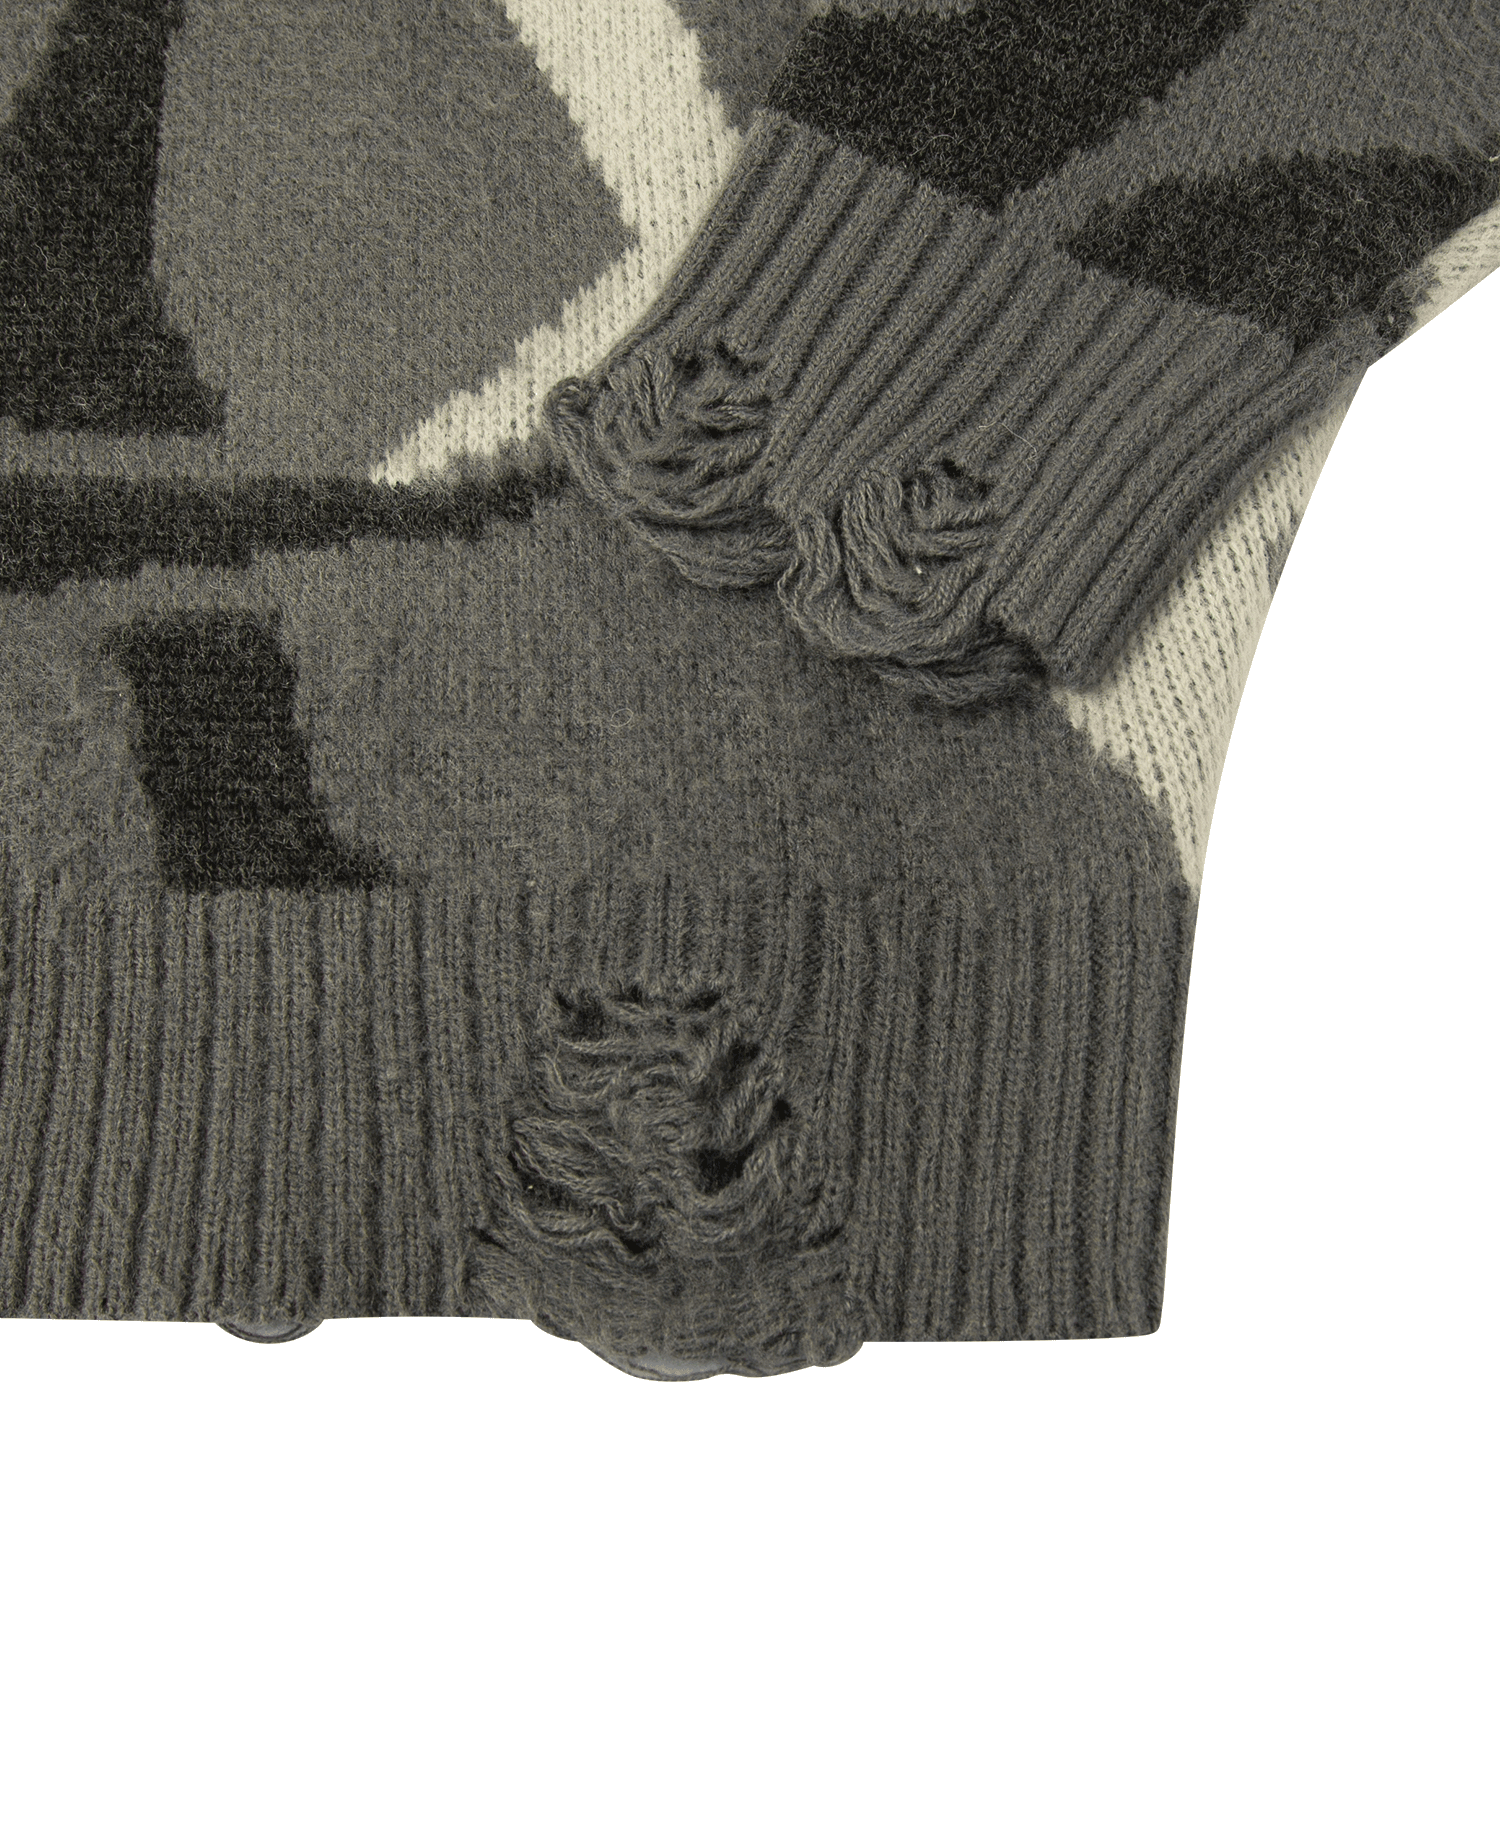 INSANE TRIVAL BRUSHED SWEATER_GRAY